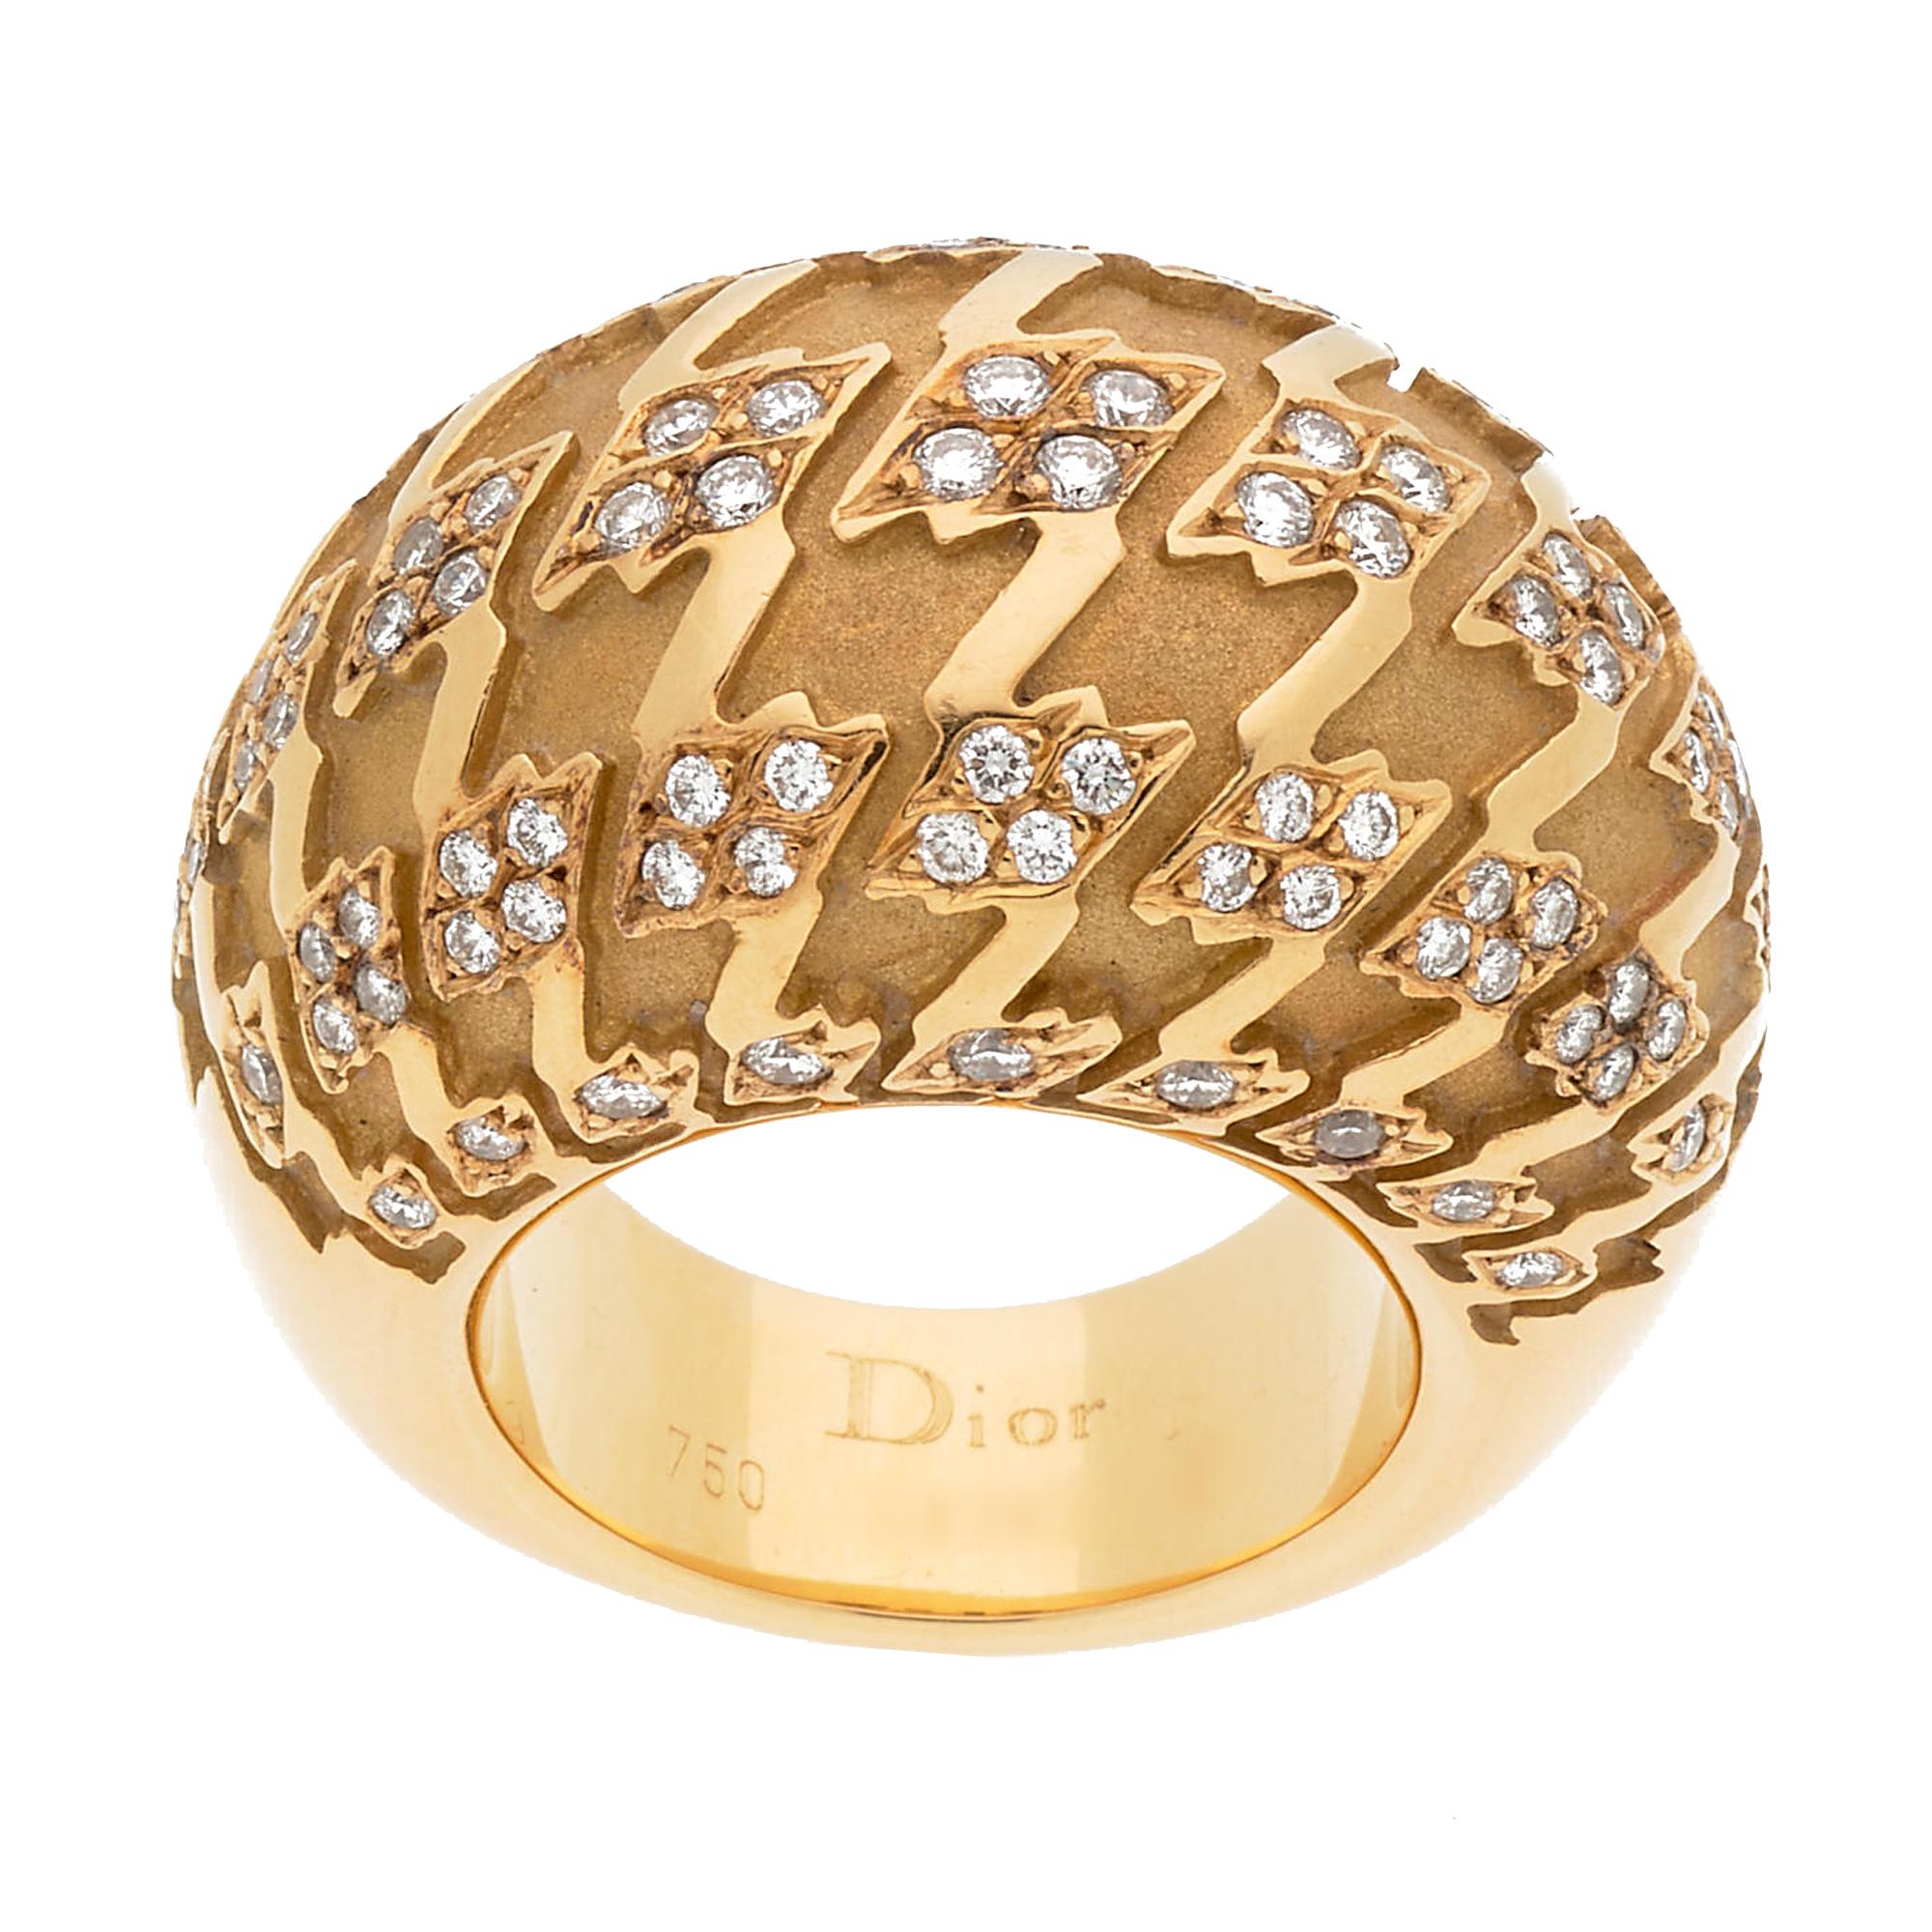 Dior Houndstooth Yellow Gold Diamond Bombe Cocktail Ring In Excellent Condition For Sale In Feasterville, PA